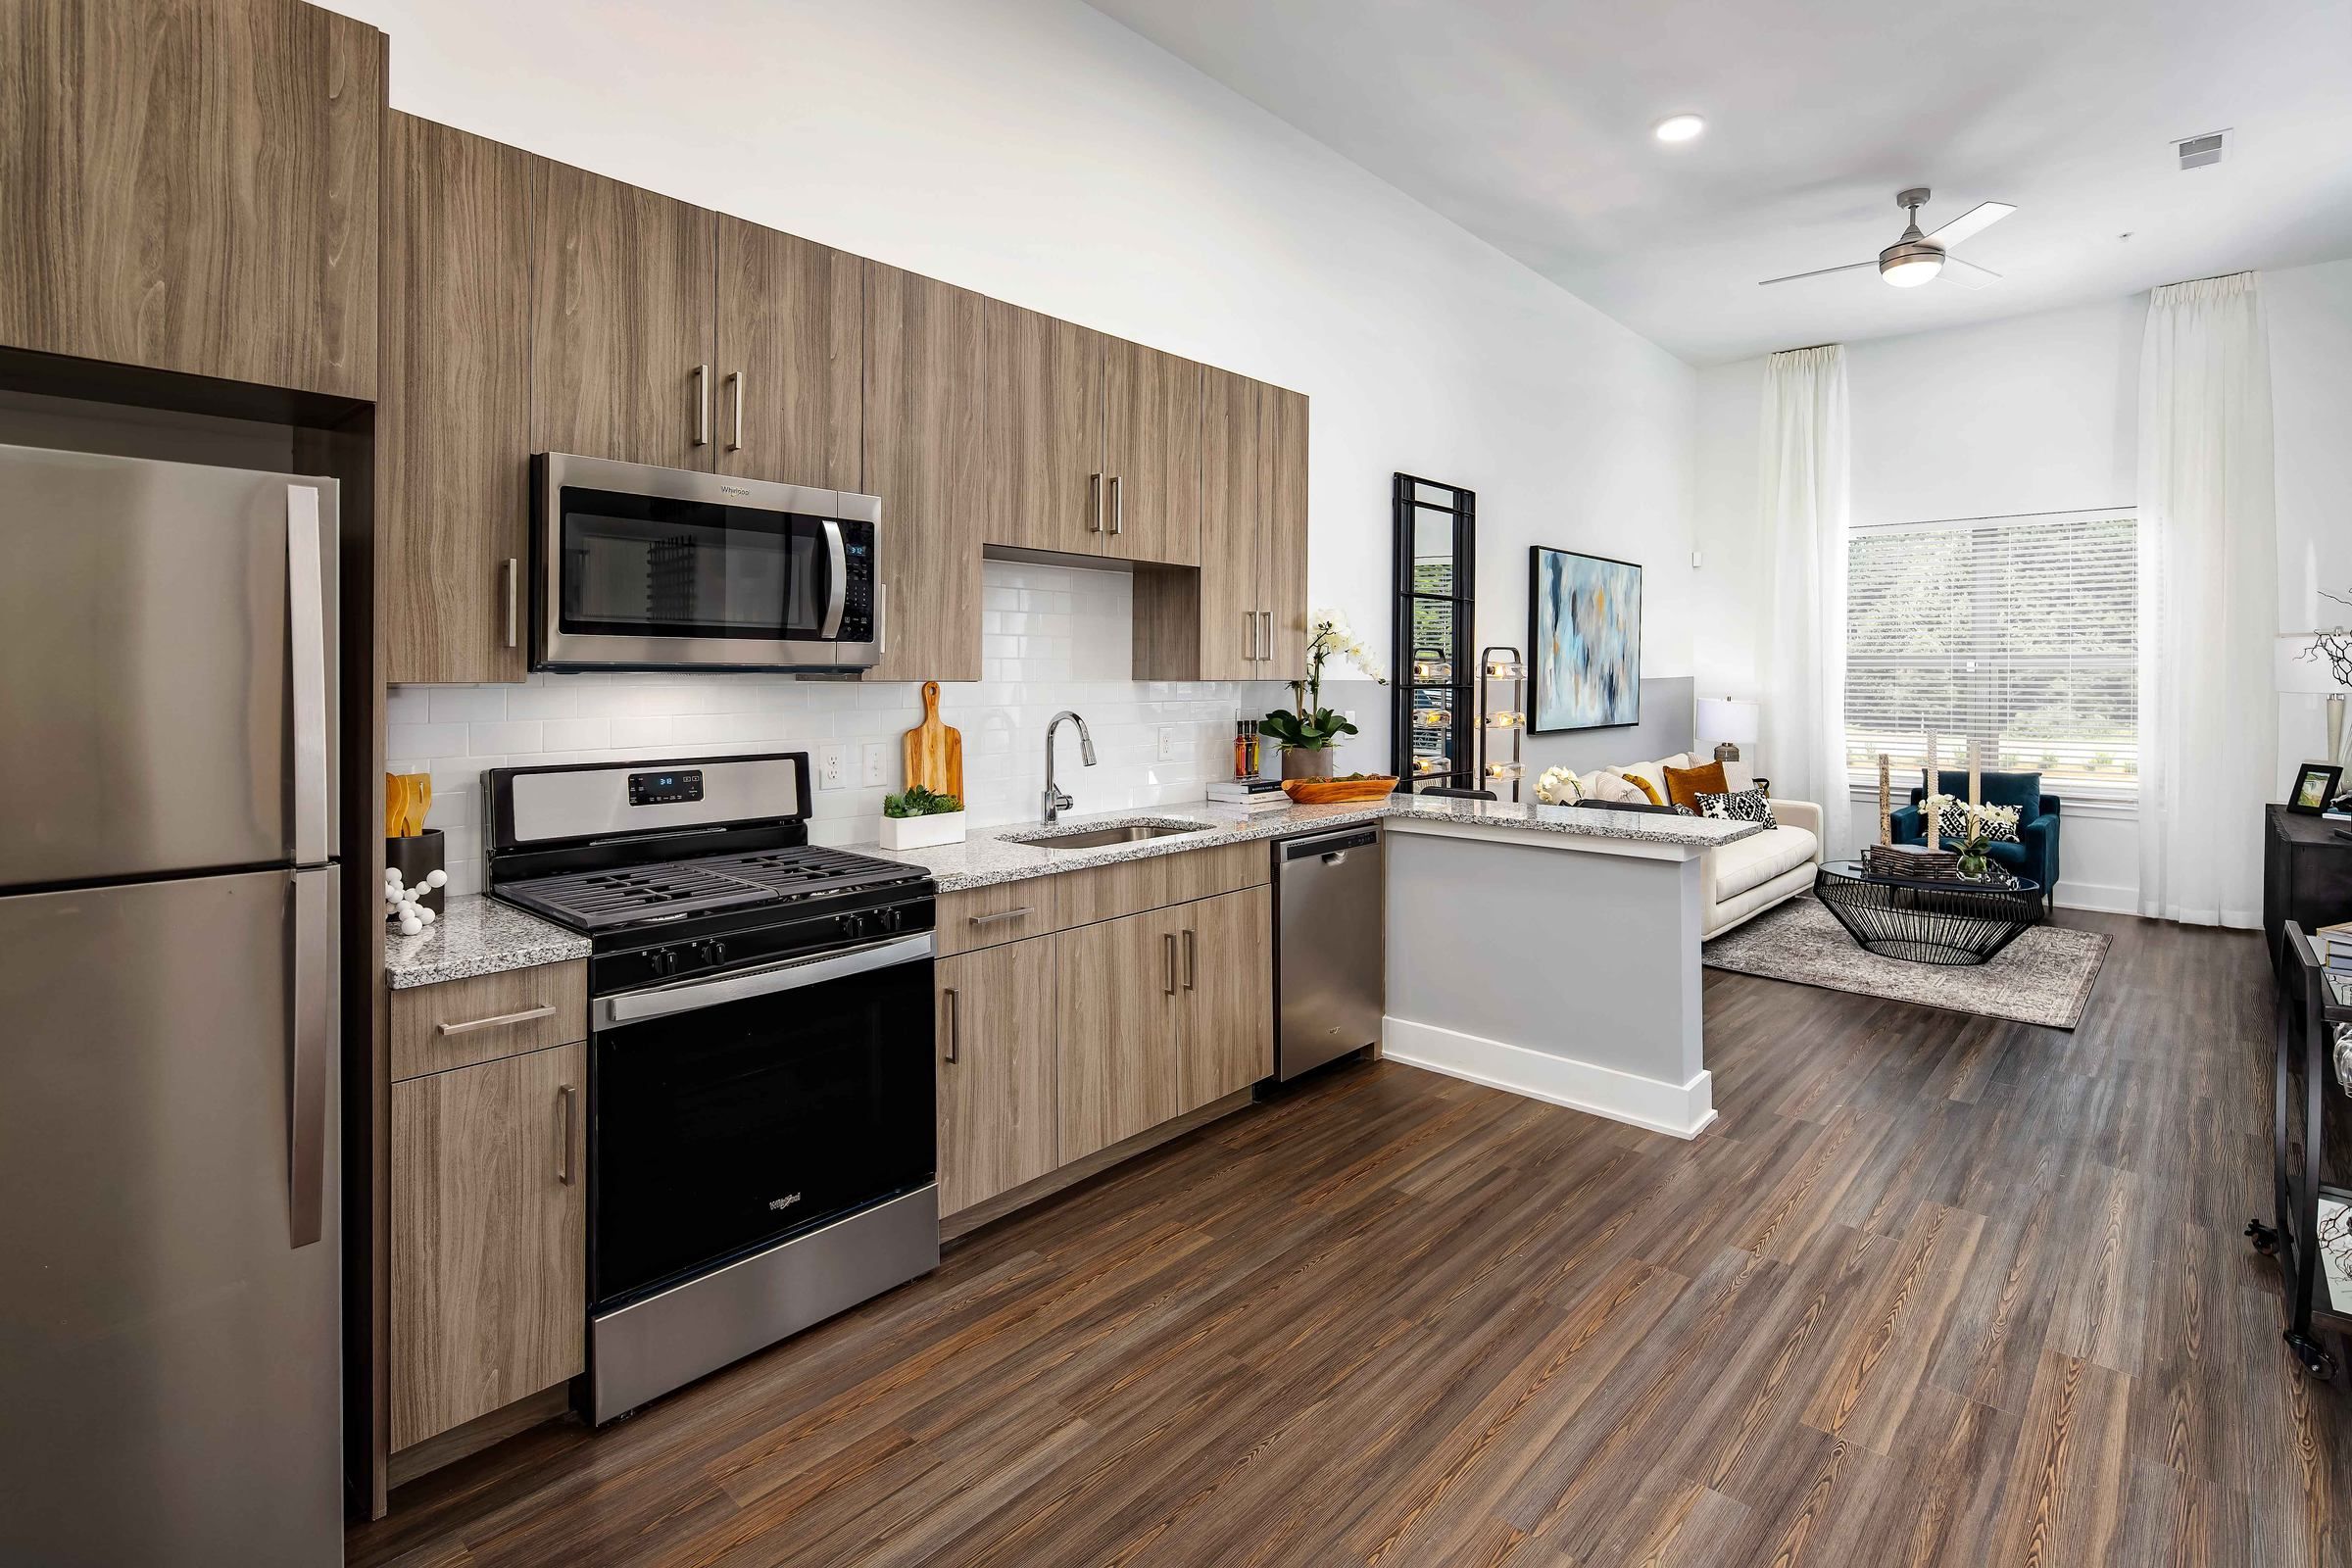 A chic kitchen in Alta Ashley Park, with sleek gray cabinets, stainless steel appliances, and a cozy living area illuminated by natural light from large windows.